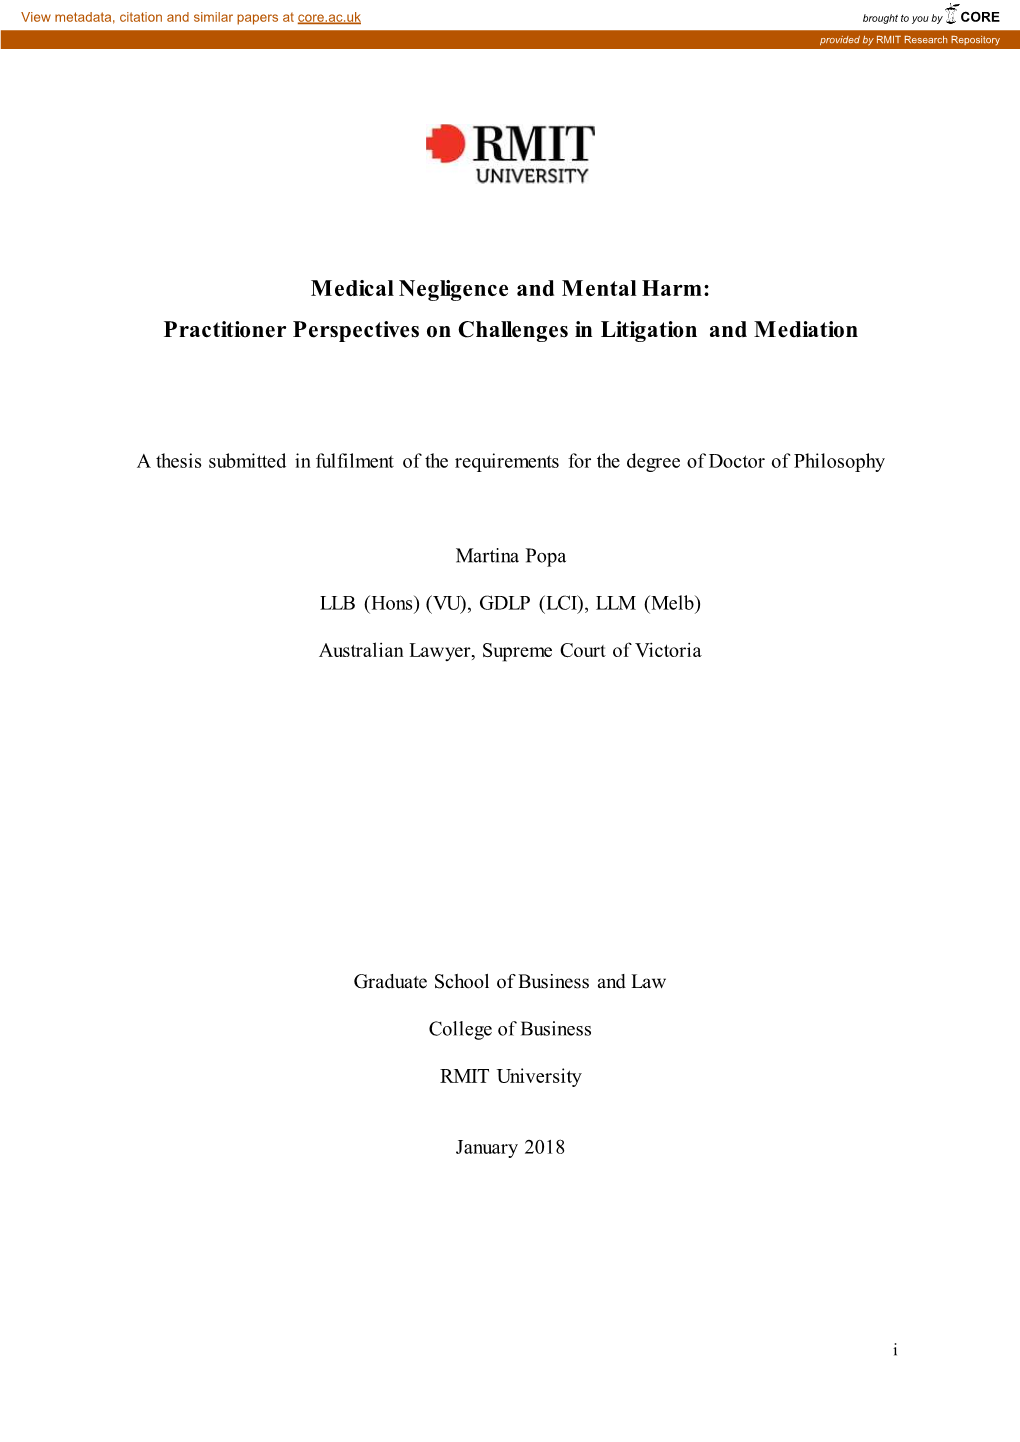 Medical Negligence and Mental Harm: Practitioner Perspectives on Challenges in Litigation and Mediation